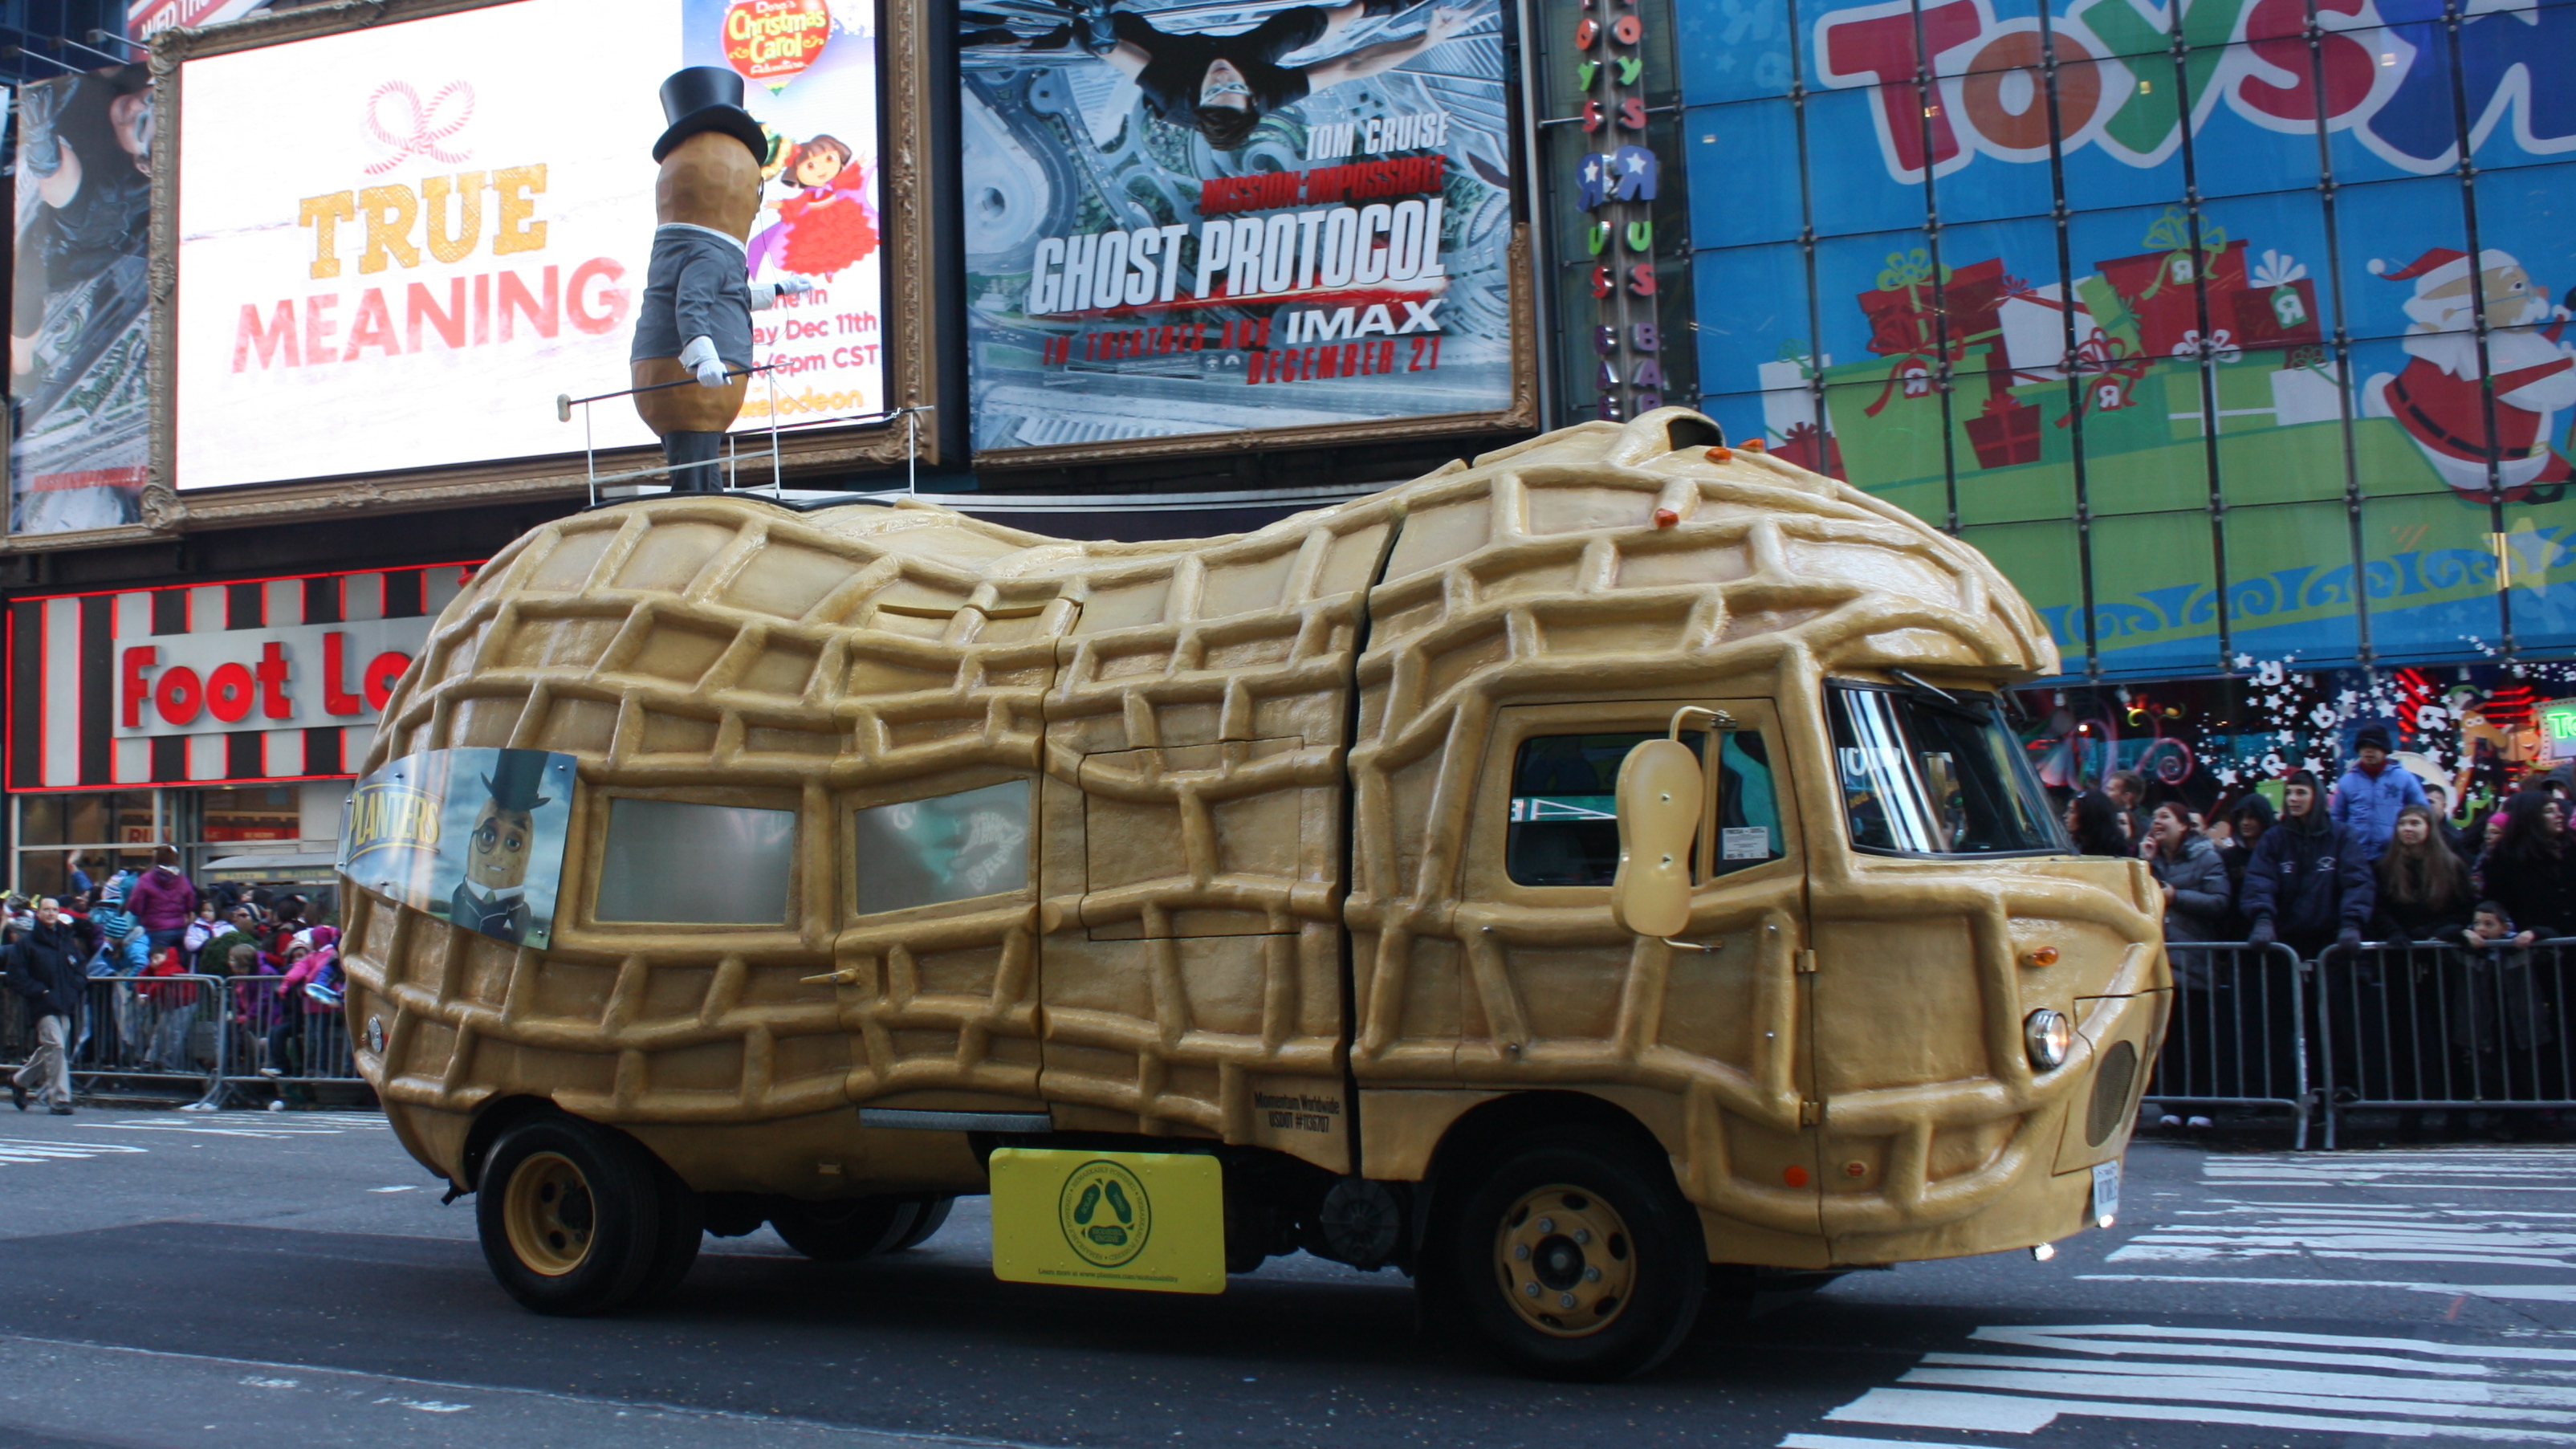 The Planters Nutmobile, seen here taking a starring turn at the Macy's Thanksgiving Day Parade, is hitting the road for a yearlong trip across the U.S. Photo: Peter Roan/Flickr